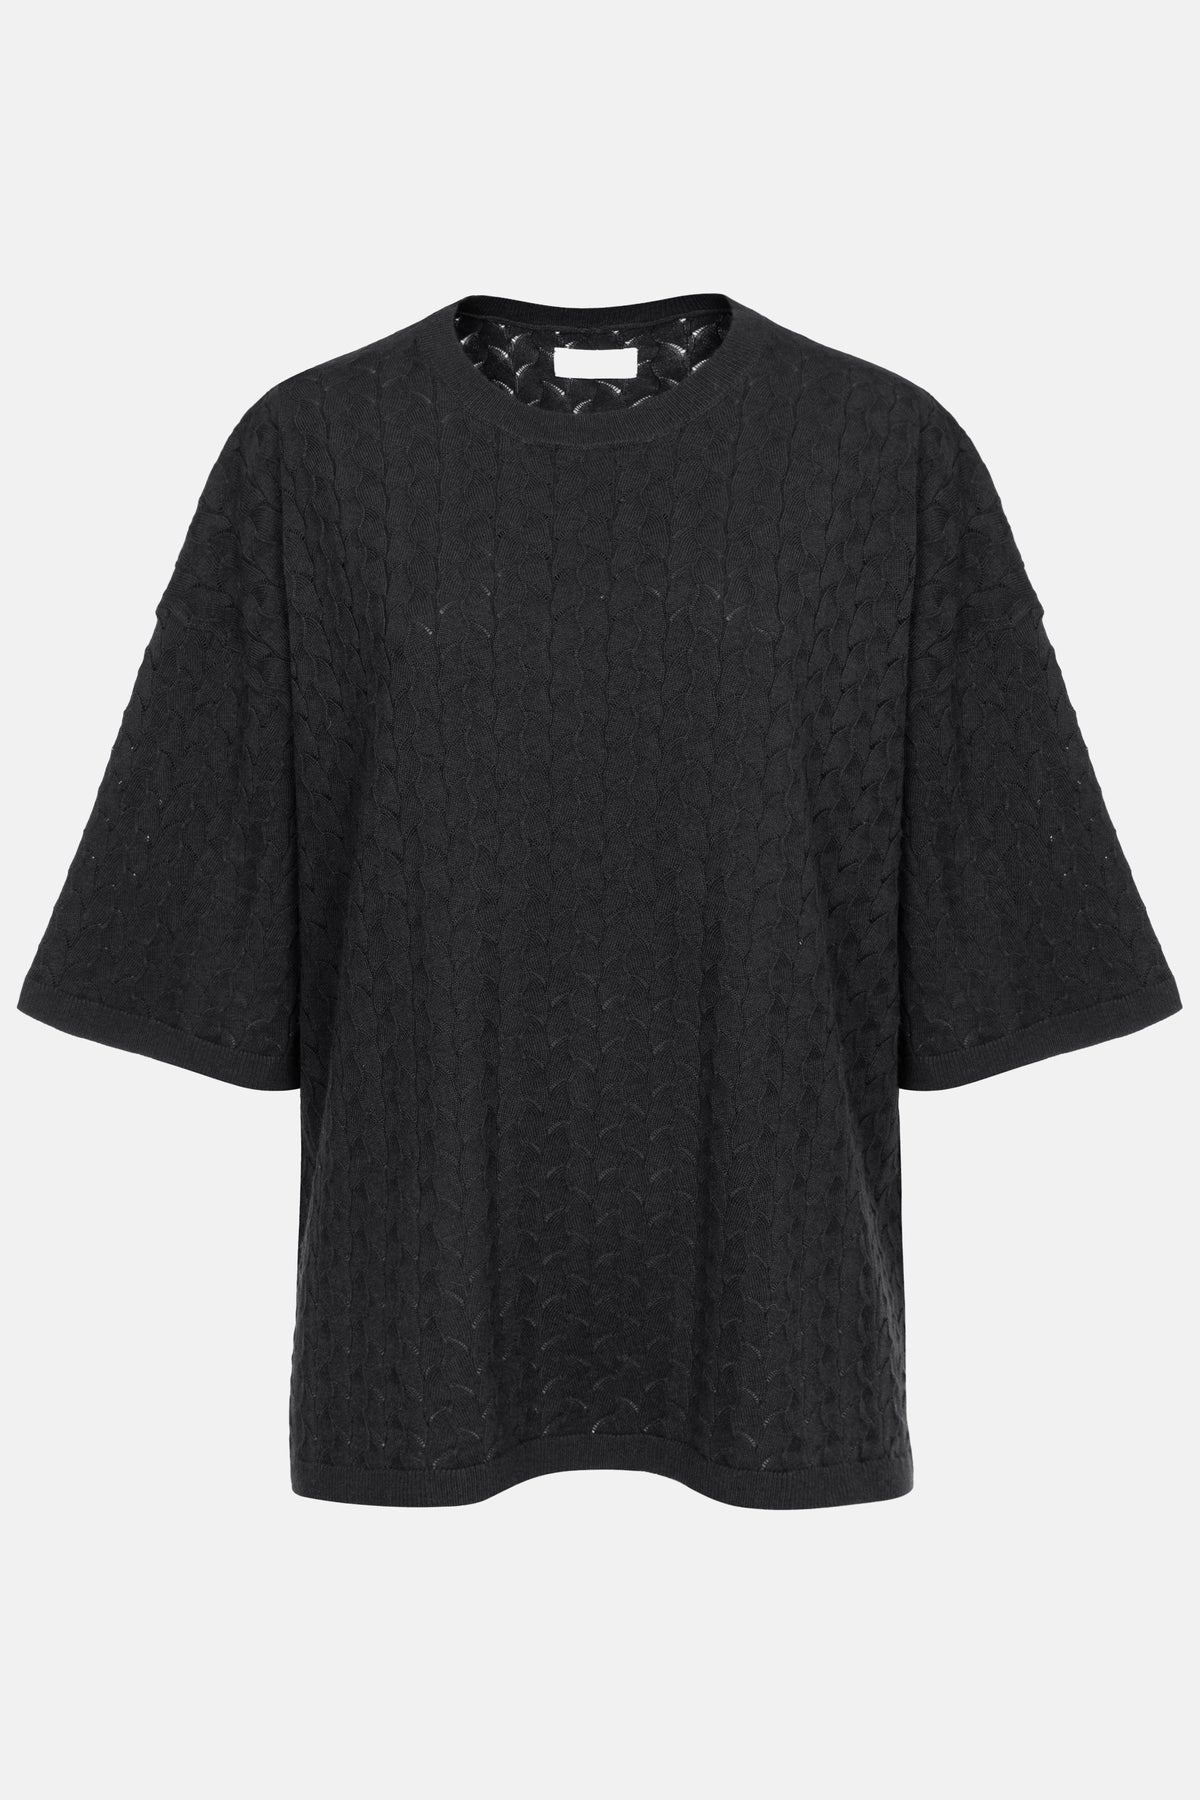 Iloise Jacquard Knitted Top | Black